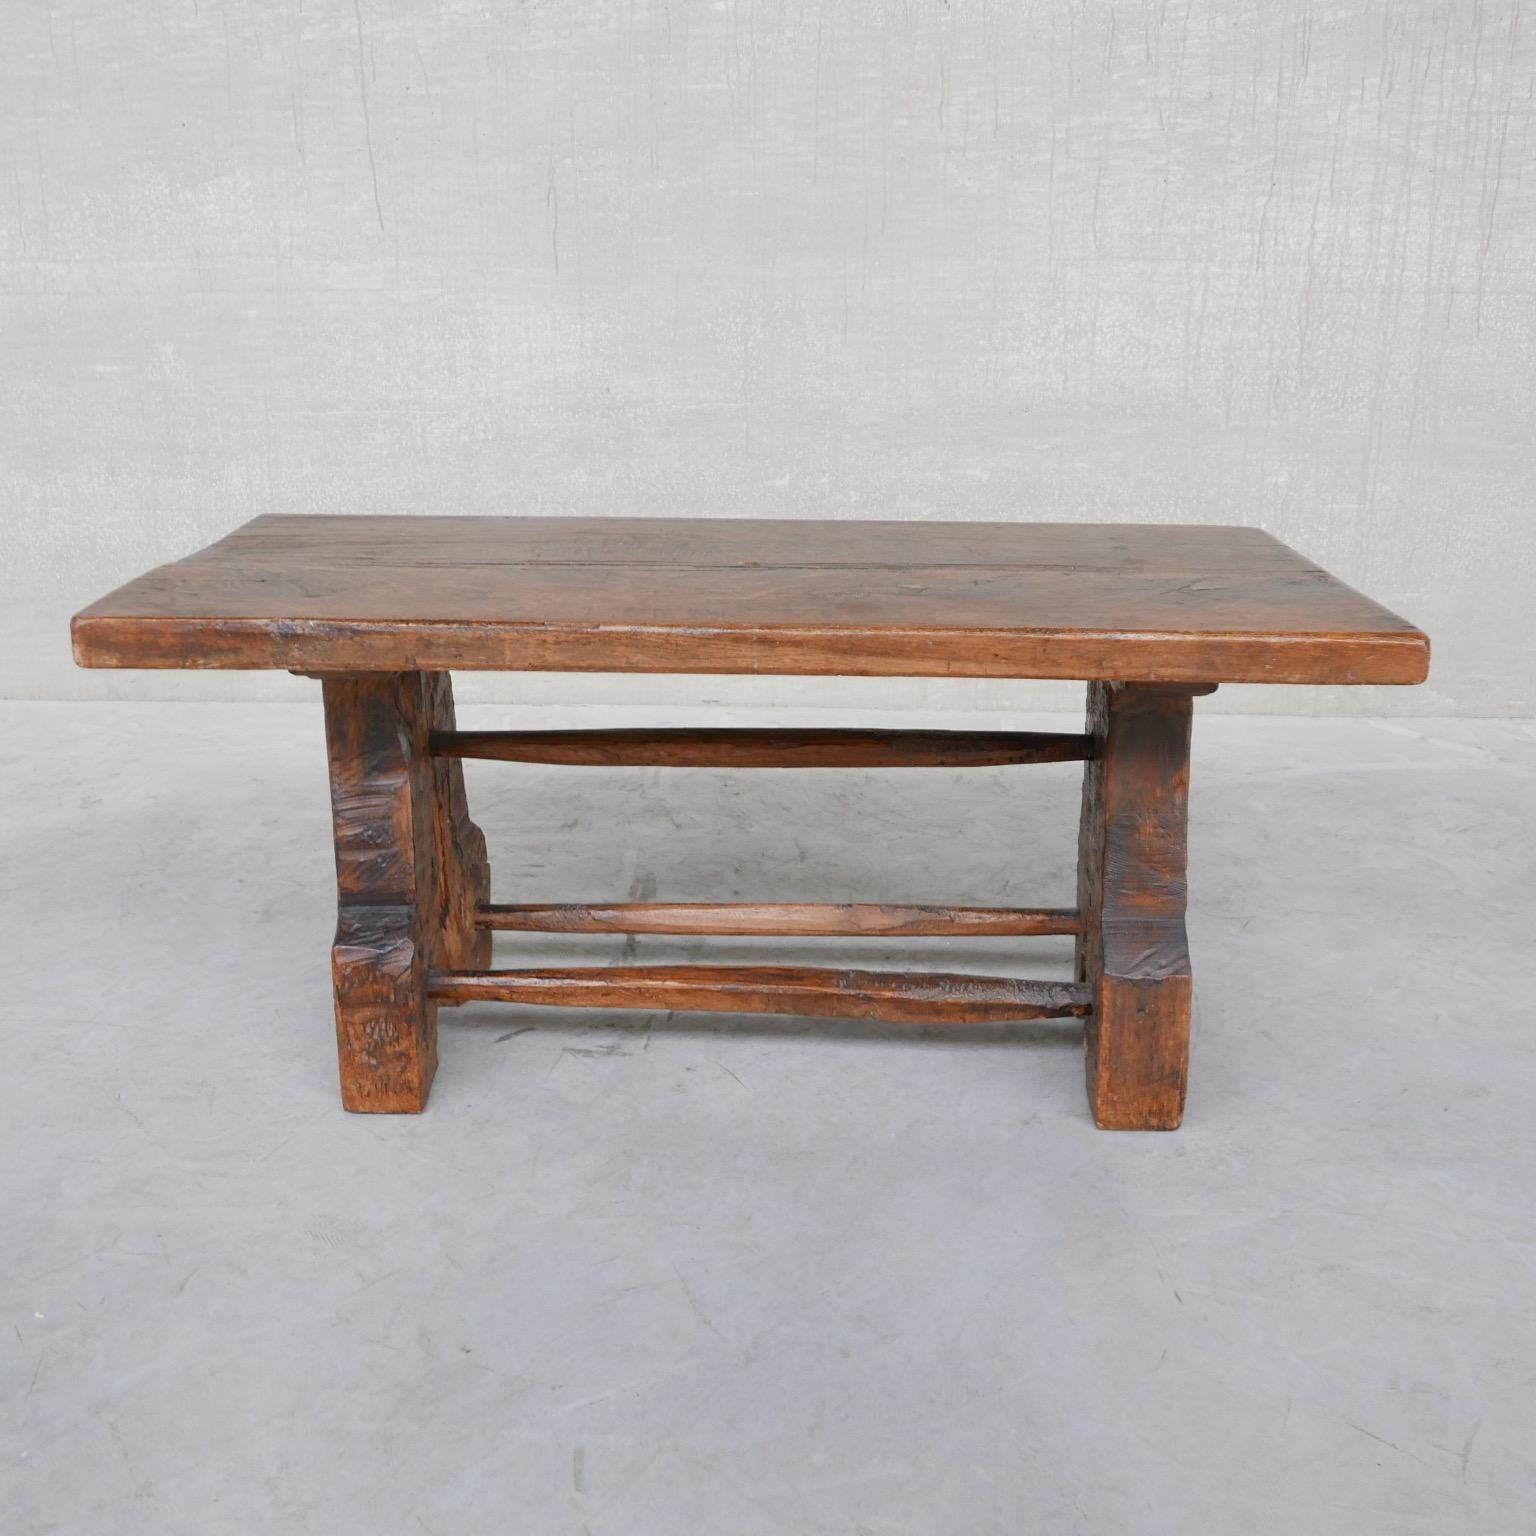 An exceptional oak coffee table. 

Naively made with peg stretchers. 

Belgium, c1950s. 

Wonderful patina. 

Wear commensurate with age.

Location: Belgium Gallery. 

Dimensions: 120 W x 58 D x 55 H in cm. 

Delivery: POA

We can